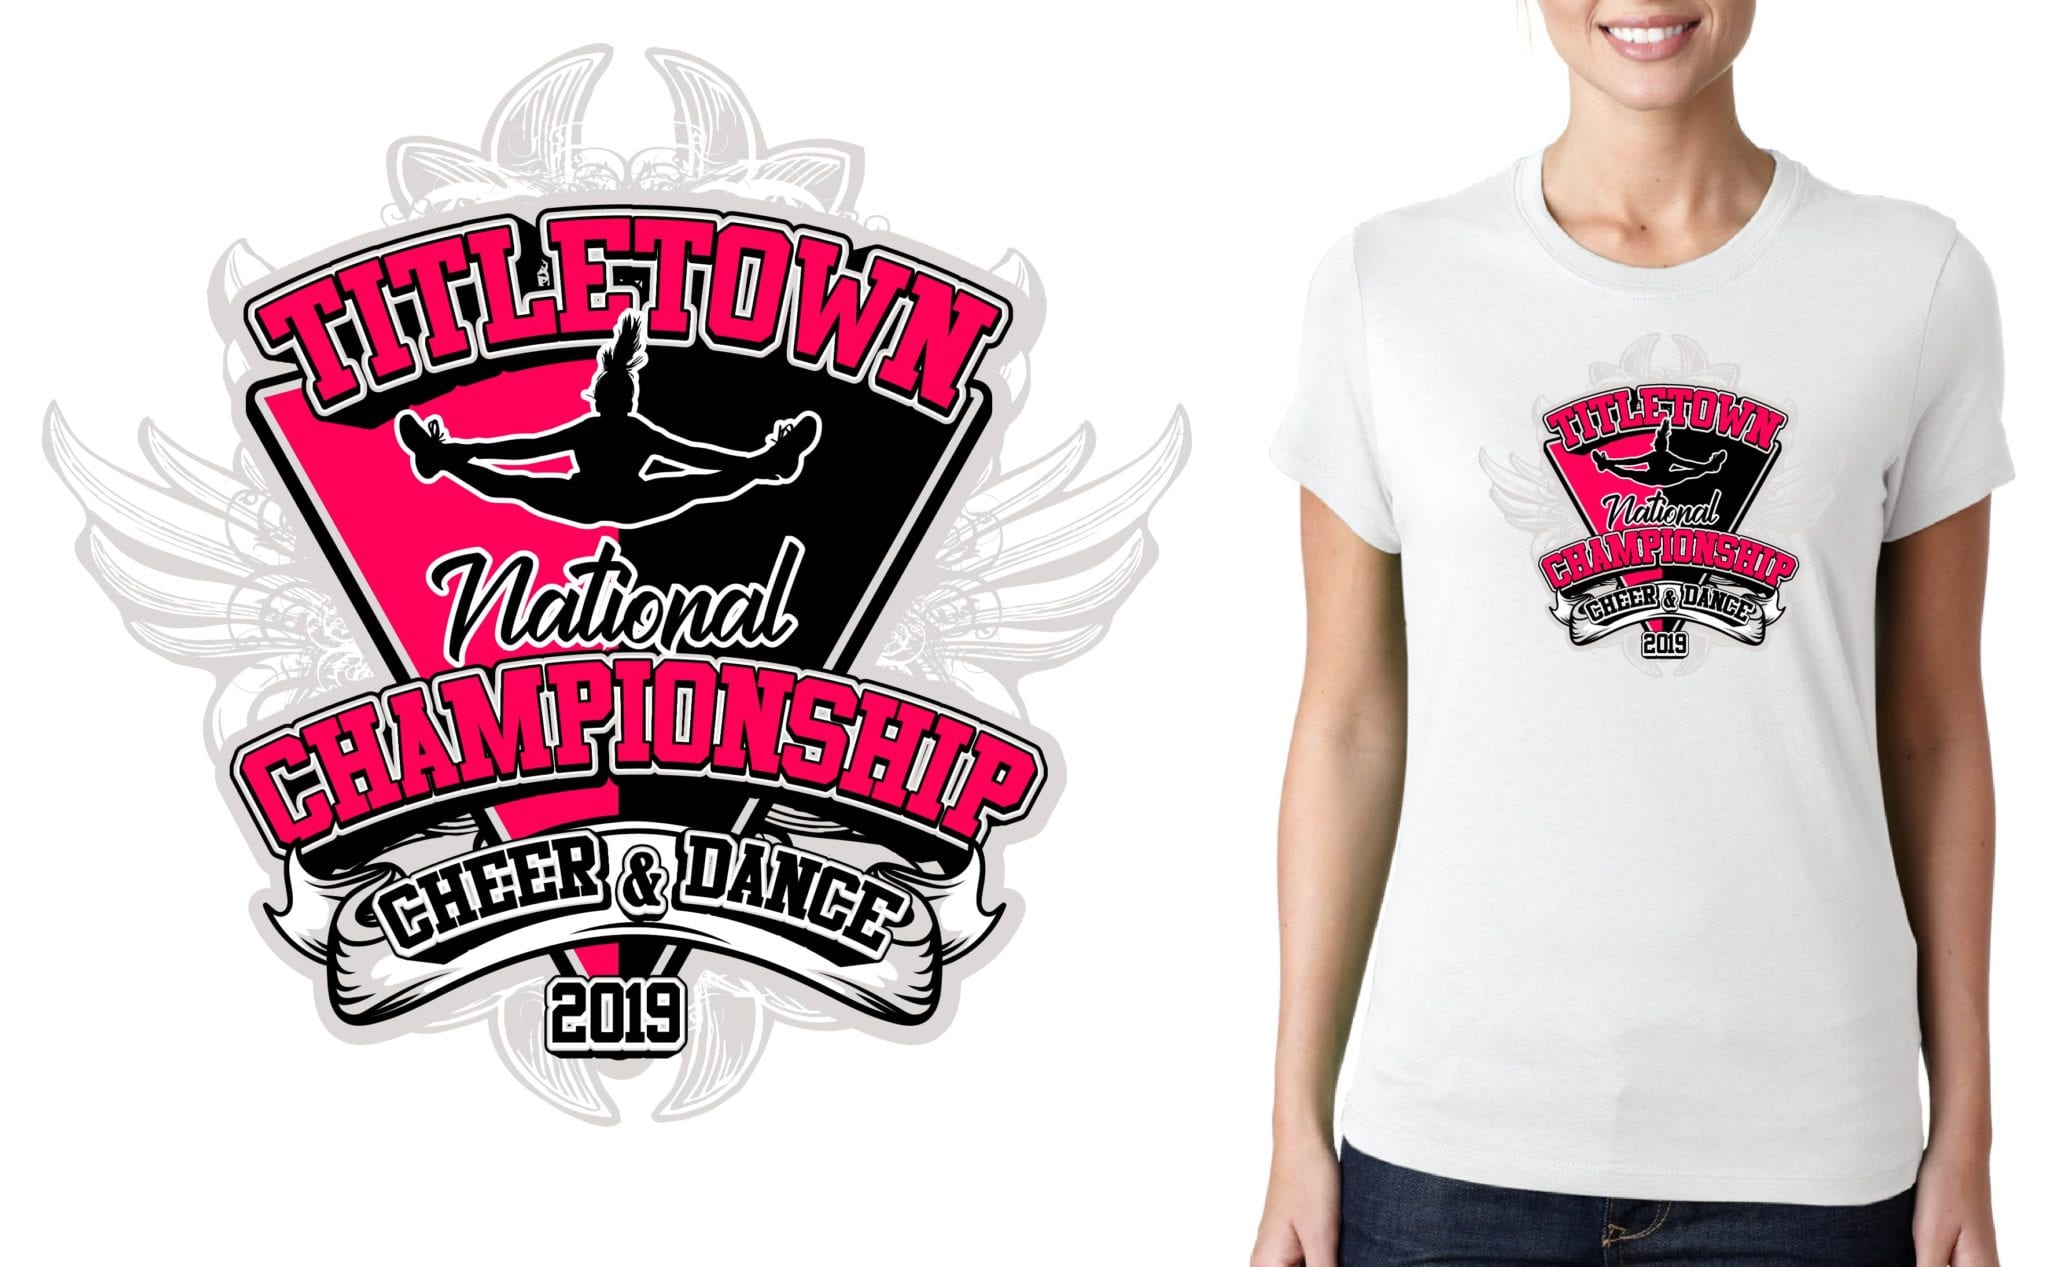 25th Annual New England Cheer and Dance Championship cheer logo design